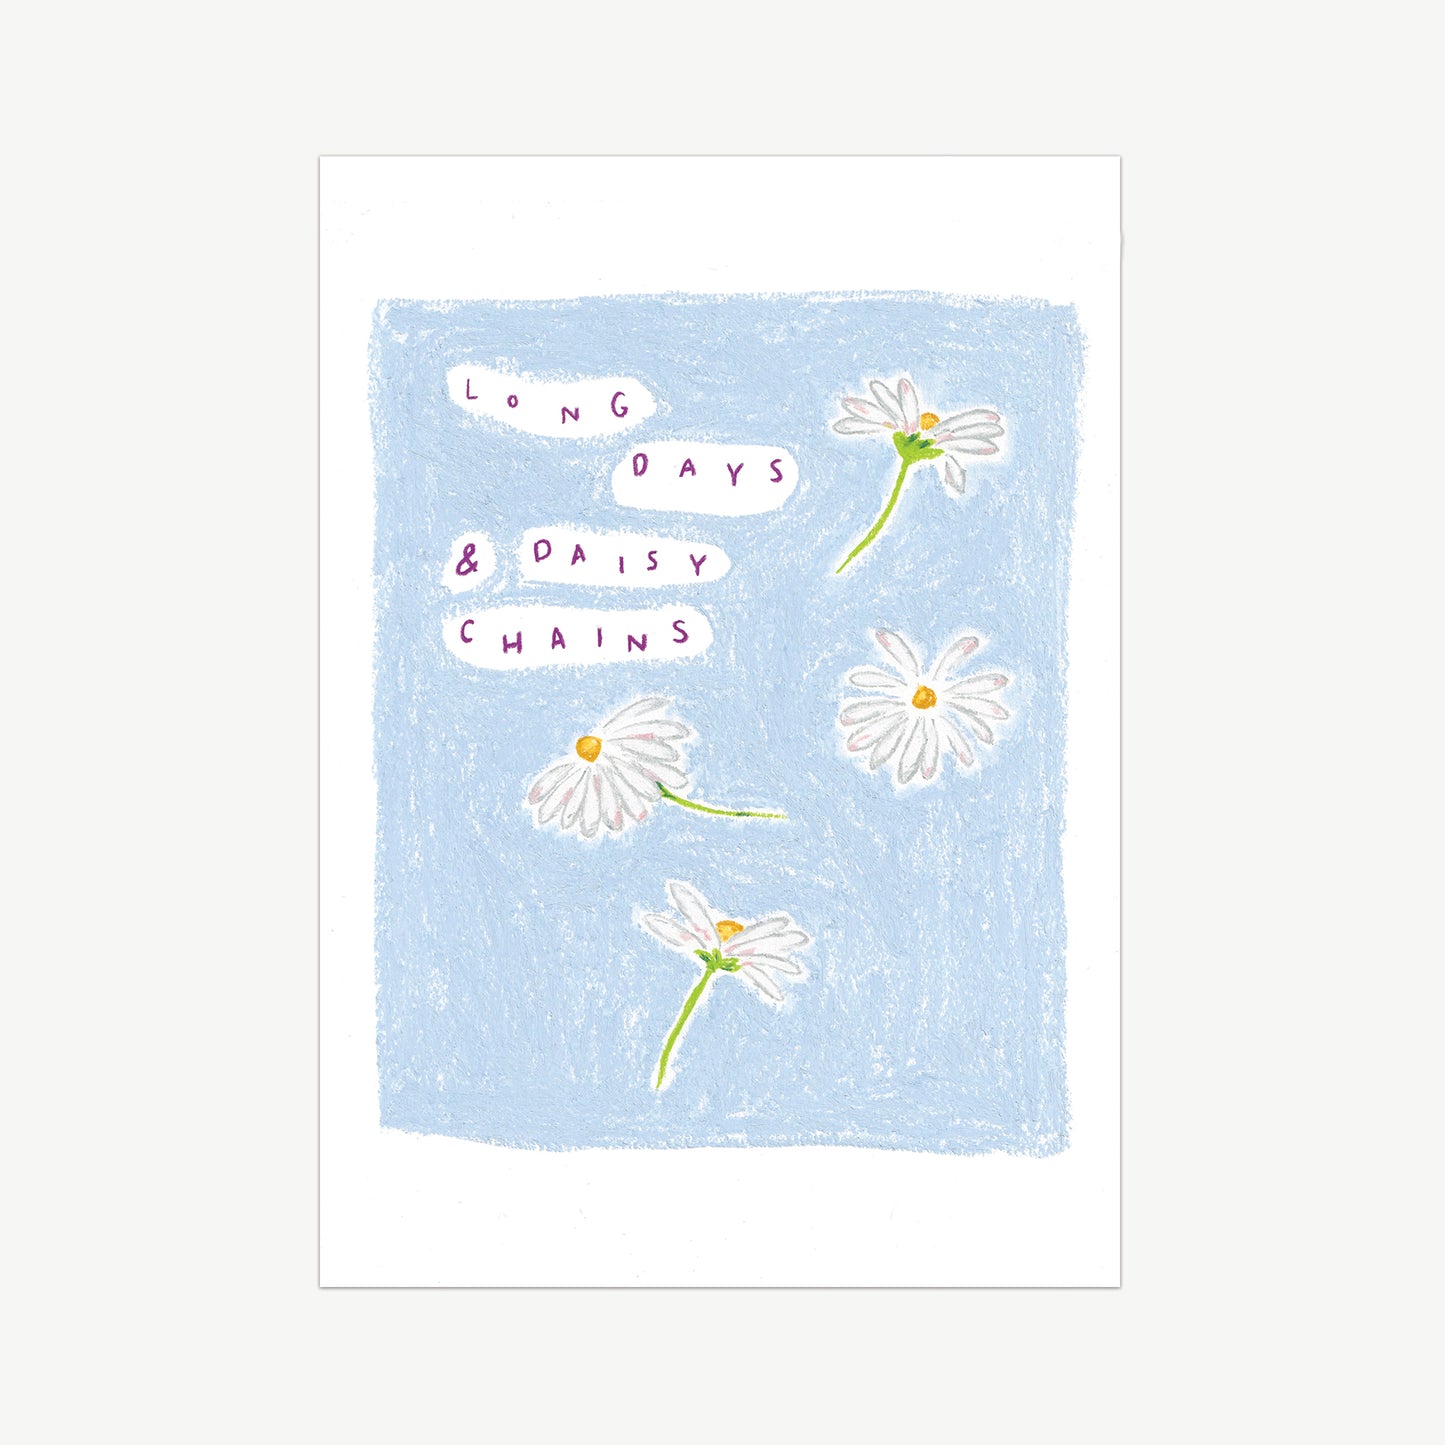 Hand-drawn print of white daises with dashes on pink in the details, the words 'long days and daisy chains' written on the left hand side, surrounded by a light blue background. Drawn with pastel pencils.